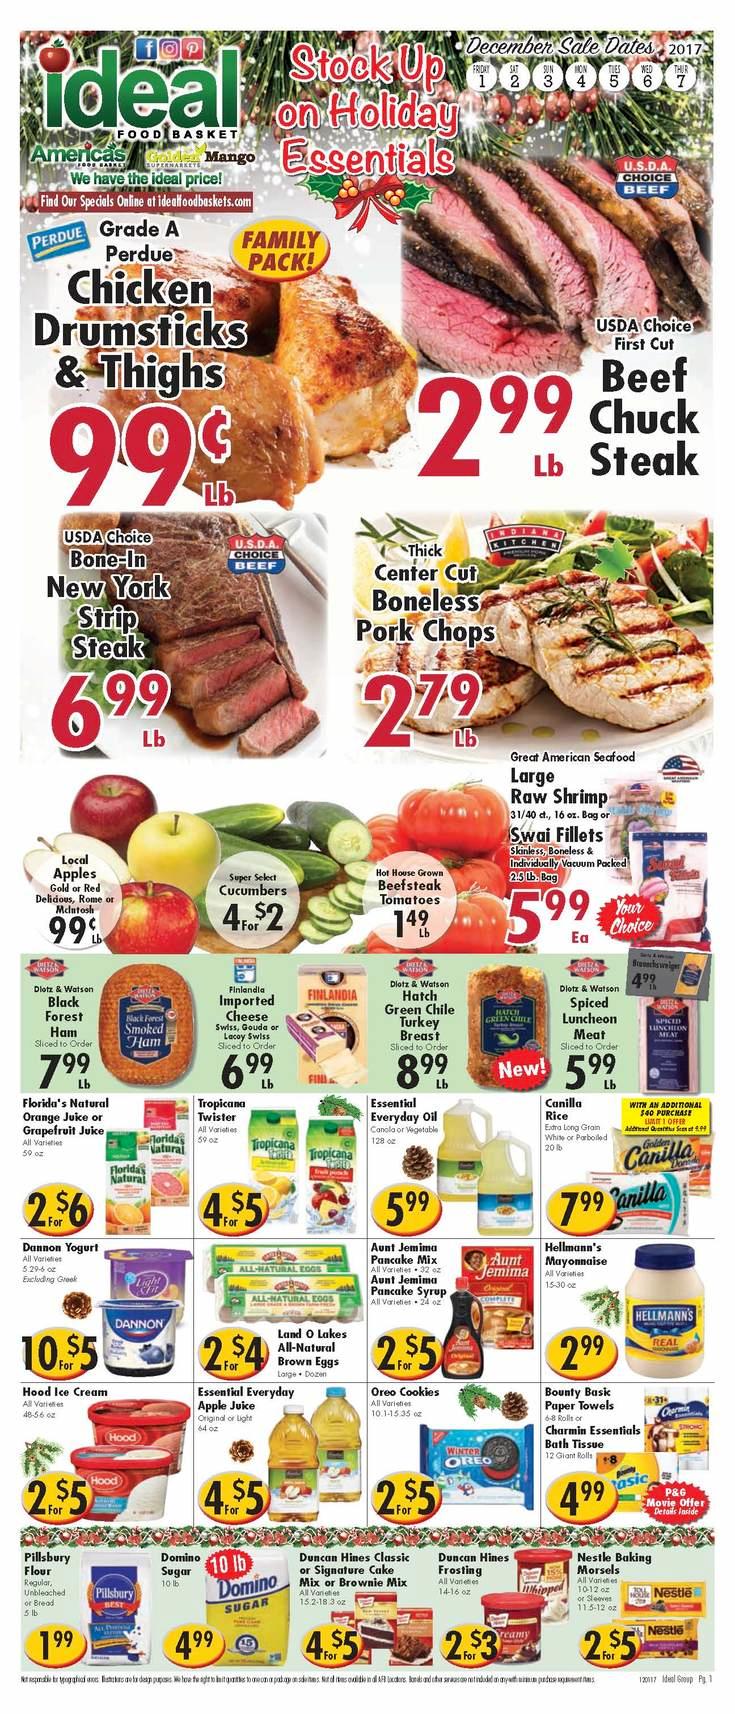 AFB Golden Mango Supermarkets Coupons near me in Brooklyn | 8coupons